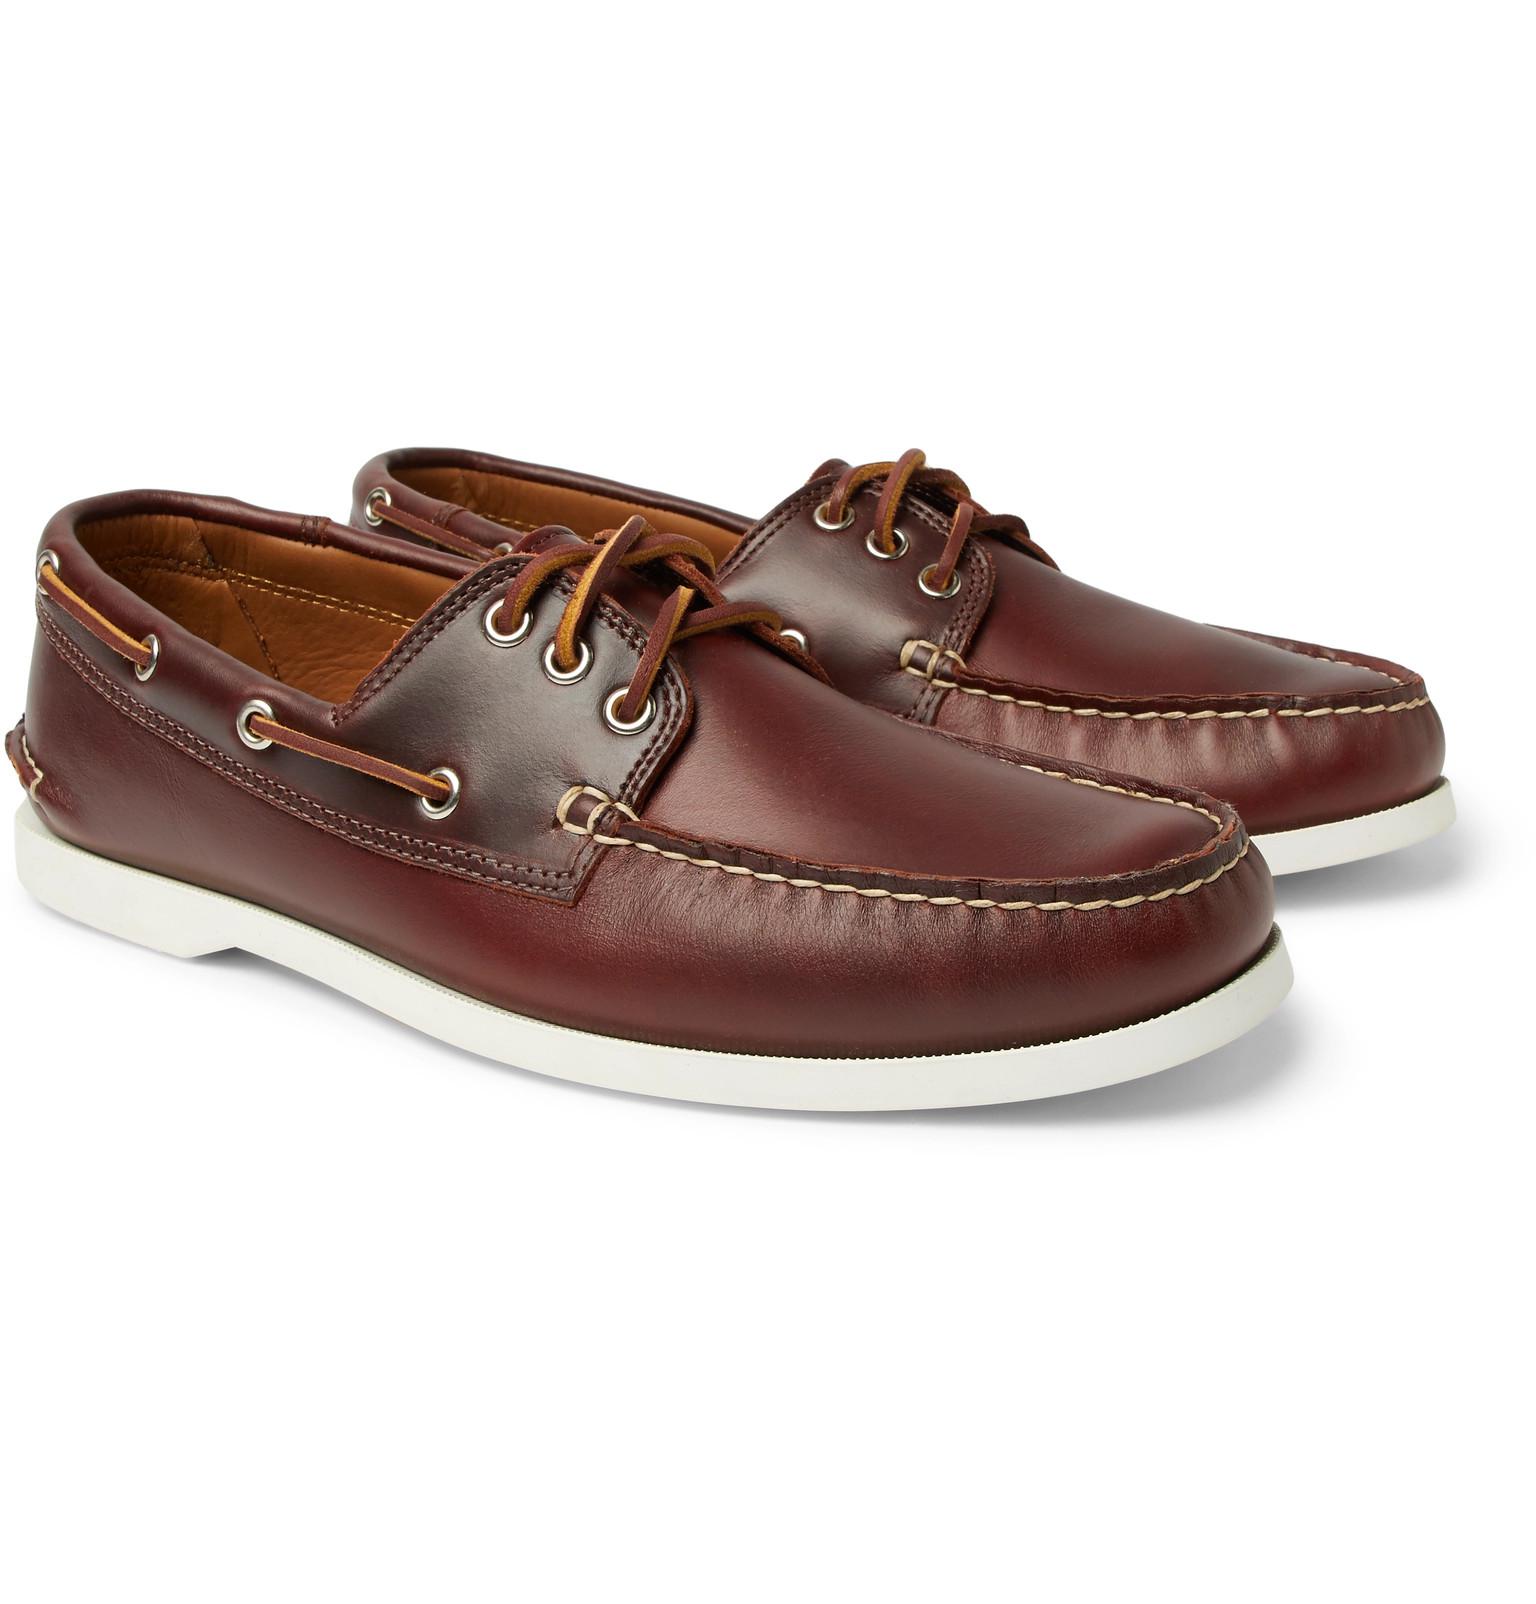 Lyst Quoddy Downeast Leather Boat Shoes in Brown for Men